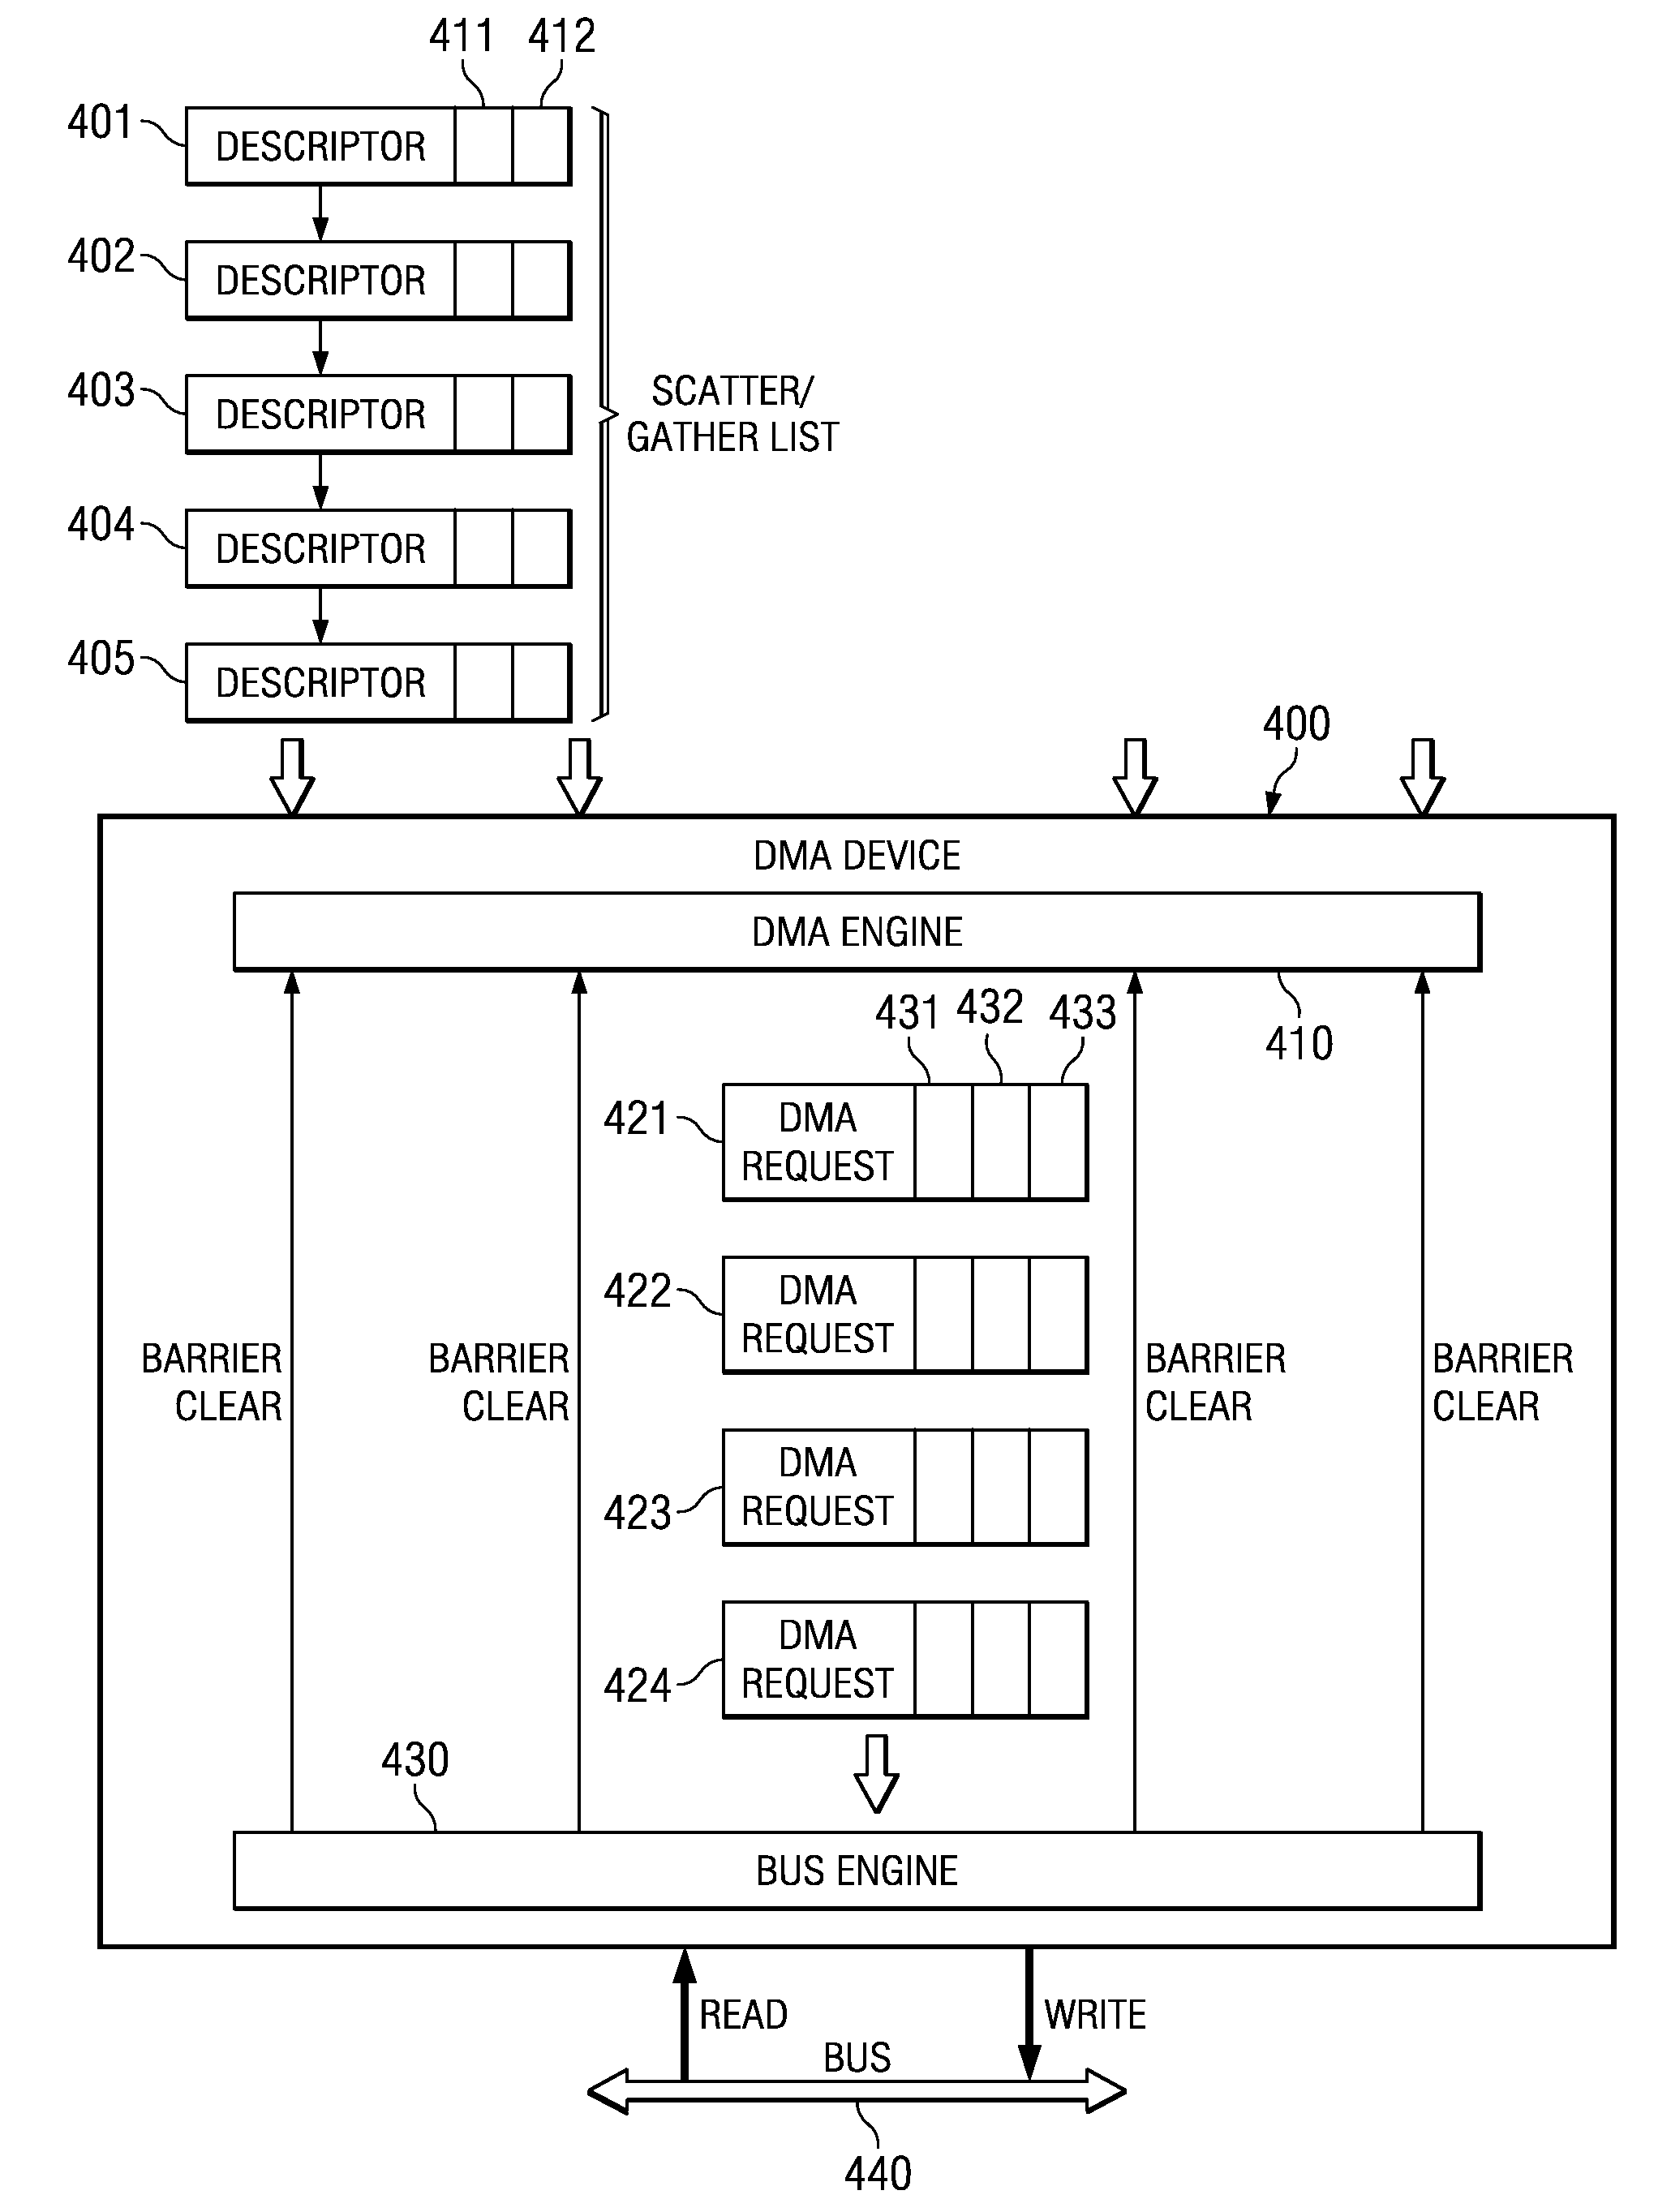 Barrier and Interrupt Mechanism for High Latency and Out of Order DMA Device